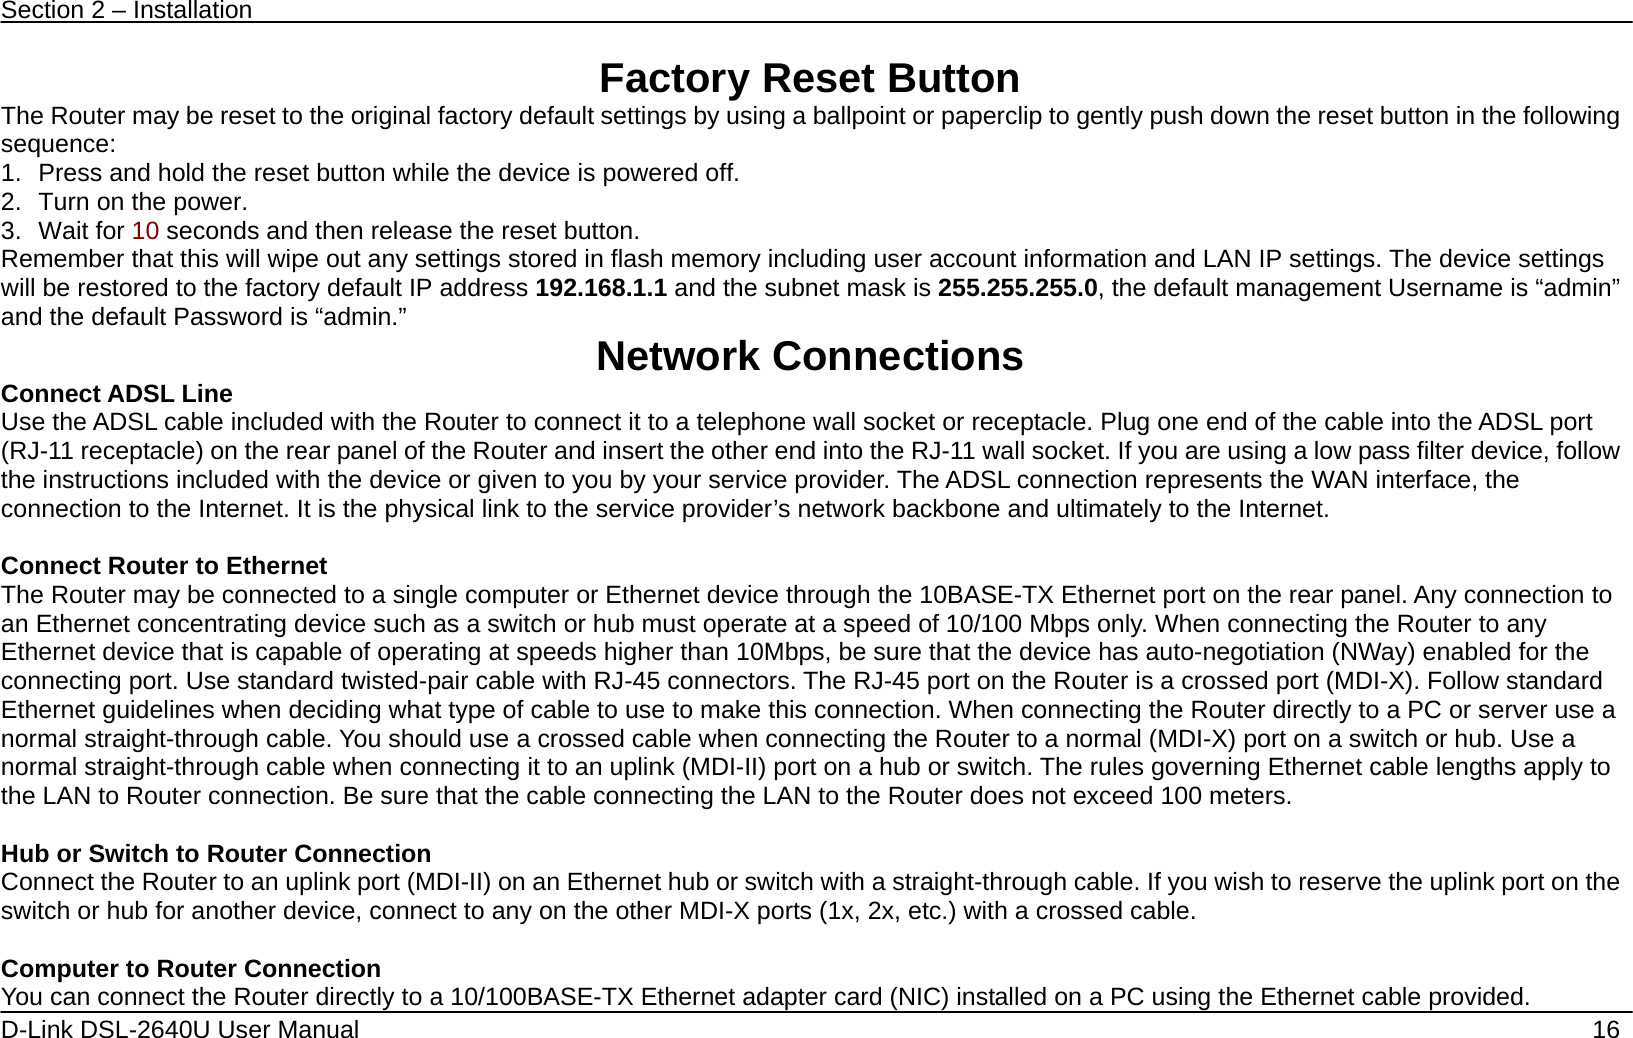 Section 2 – Installation   D-Link DSL-2640U User Manual    16 Factory Reset Button The Router may be reset to the original factory default settings by using a ballpoint or paperclip to gently push down the reset button in the following sequence:  1.  Press and hold the reset button while the device is powered off. 2.  Turn on the power. 3. Wait for 10 seconds and then release the reset button.   Remember that this will wipe out any settings stored in flash memory including user account information and LAN IP settings. The device settings will be restored to the factory default IP address 192.168.1.1 and the subnet mask is 255.255.255.0, the default management Username is “admin” and the default Password is “admin.”  Network Connections   Connect ADSL Line Use the ADSL cable included with the Router to connect it to a telephone wall socket or receptacle. Plug one end of the cable into the ADSL port (RJ-11 receptacle) on the rear panel of the Router and insert the other end into the RJ-11 wall socket. If you are using a low pass filter device, follow the instructions included with the device or given to you by your service provider. The ADSL connection represents the WAN interface, the connection to the Internet. It is the physical link to the service provider’s network backbone and ultimately to the Internet.    Connect Router to Ethernet   The Router may be connected to a single computer or Ethernet device through the 10BASE-TX Ethernet port on the rear panel. Any connection to an Ethernet concentrating device such as a switch or hub must operate at a speed of 10/100 Mbps only. When connecting the Router to any Ethernet device that is capable of operating at speeds higher than 10Mbps, be sure that the device has auto-negotiation (NWay) enabled for the connecting port. Use standard twisted-pair cable with RJ-45 connectors. The RJ-45 port on the Router is a crossed port (MDI-X). Follow standard Ethernet guidelines when deciding what type of cable to use to make this connection. When connecting the Router directly to a PC or server use a normal straight-through cable. You should use a crossed cable when connecting the Router to a normal (MDI-X) port on a switch or hub. Use a normal straight-through cable when connecting it to an uplink (MDI-II) port on a hub or switch. The rules governing Ethernet cable lengths apply to the LAN to Router connection. Be sure that the cable connecting the LAN to the Router does not exceed 100 meters.  Hub or Switch to Router Connection Connect the Router to an uplink port (MDI-II) on an Ethernet hub or switch with a straight-through cable. If you wish to reserve the uplink port on the switch or hub for another device, connect to any on the other MDI-X ports (1x, 2x, etc.) with a crossed cable.  Computer to Router Connection You can connect the Router directly to a 10/100BASE-TX Ethernet adapter card (NIC) installed on a PC using the Ethernet cable provided.